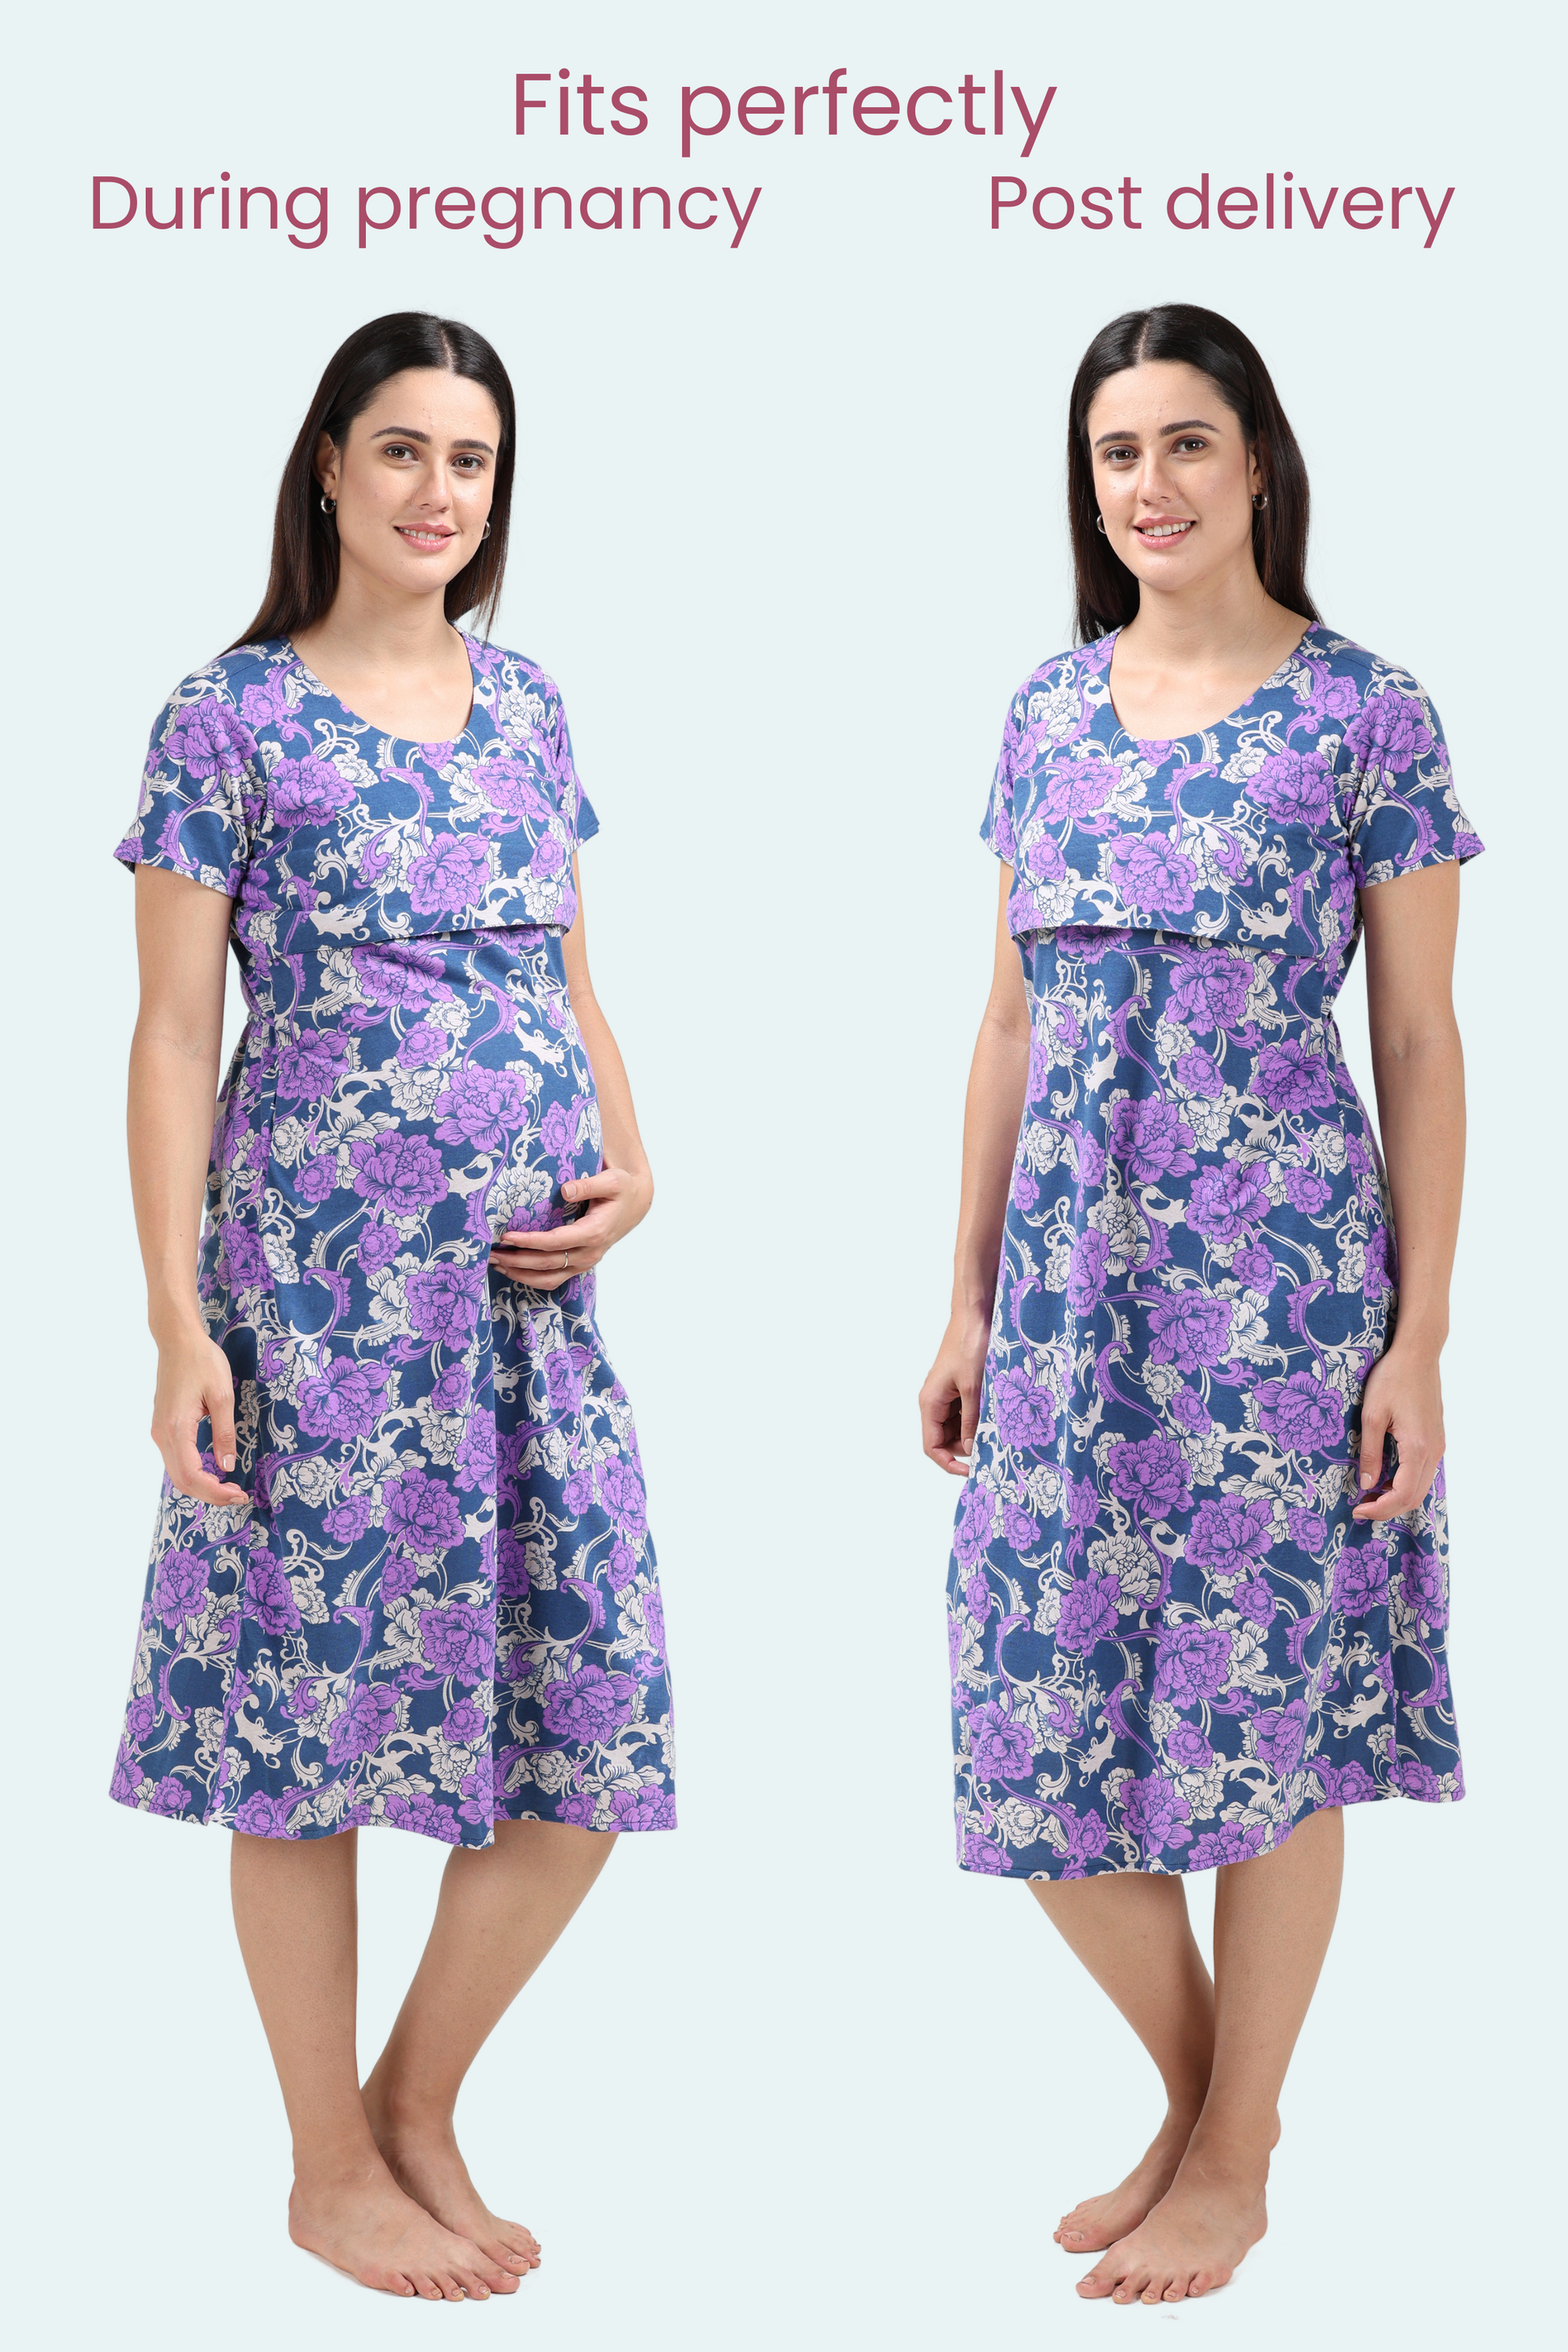 Maternity Gowns During Pregnancy & After Pregnancy